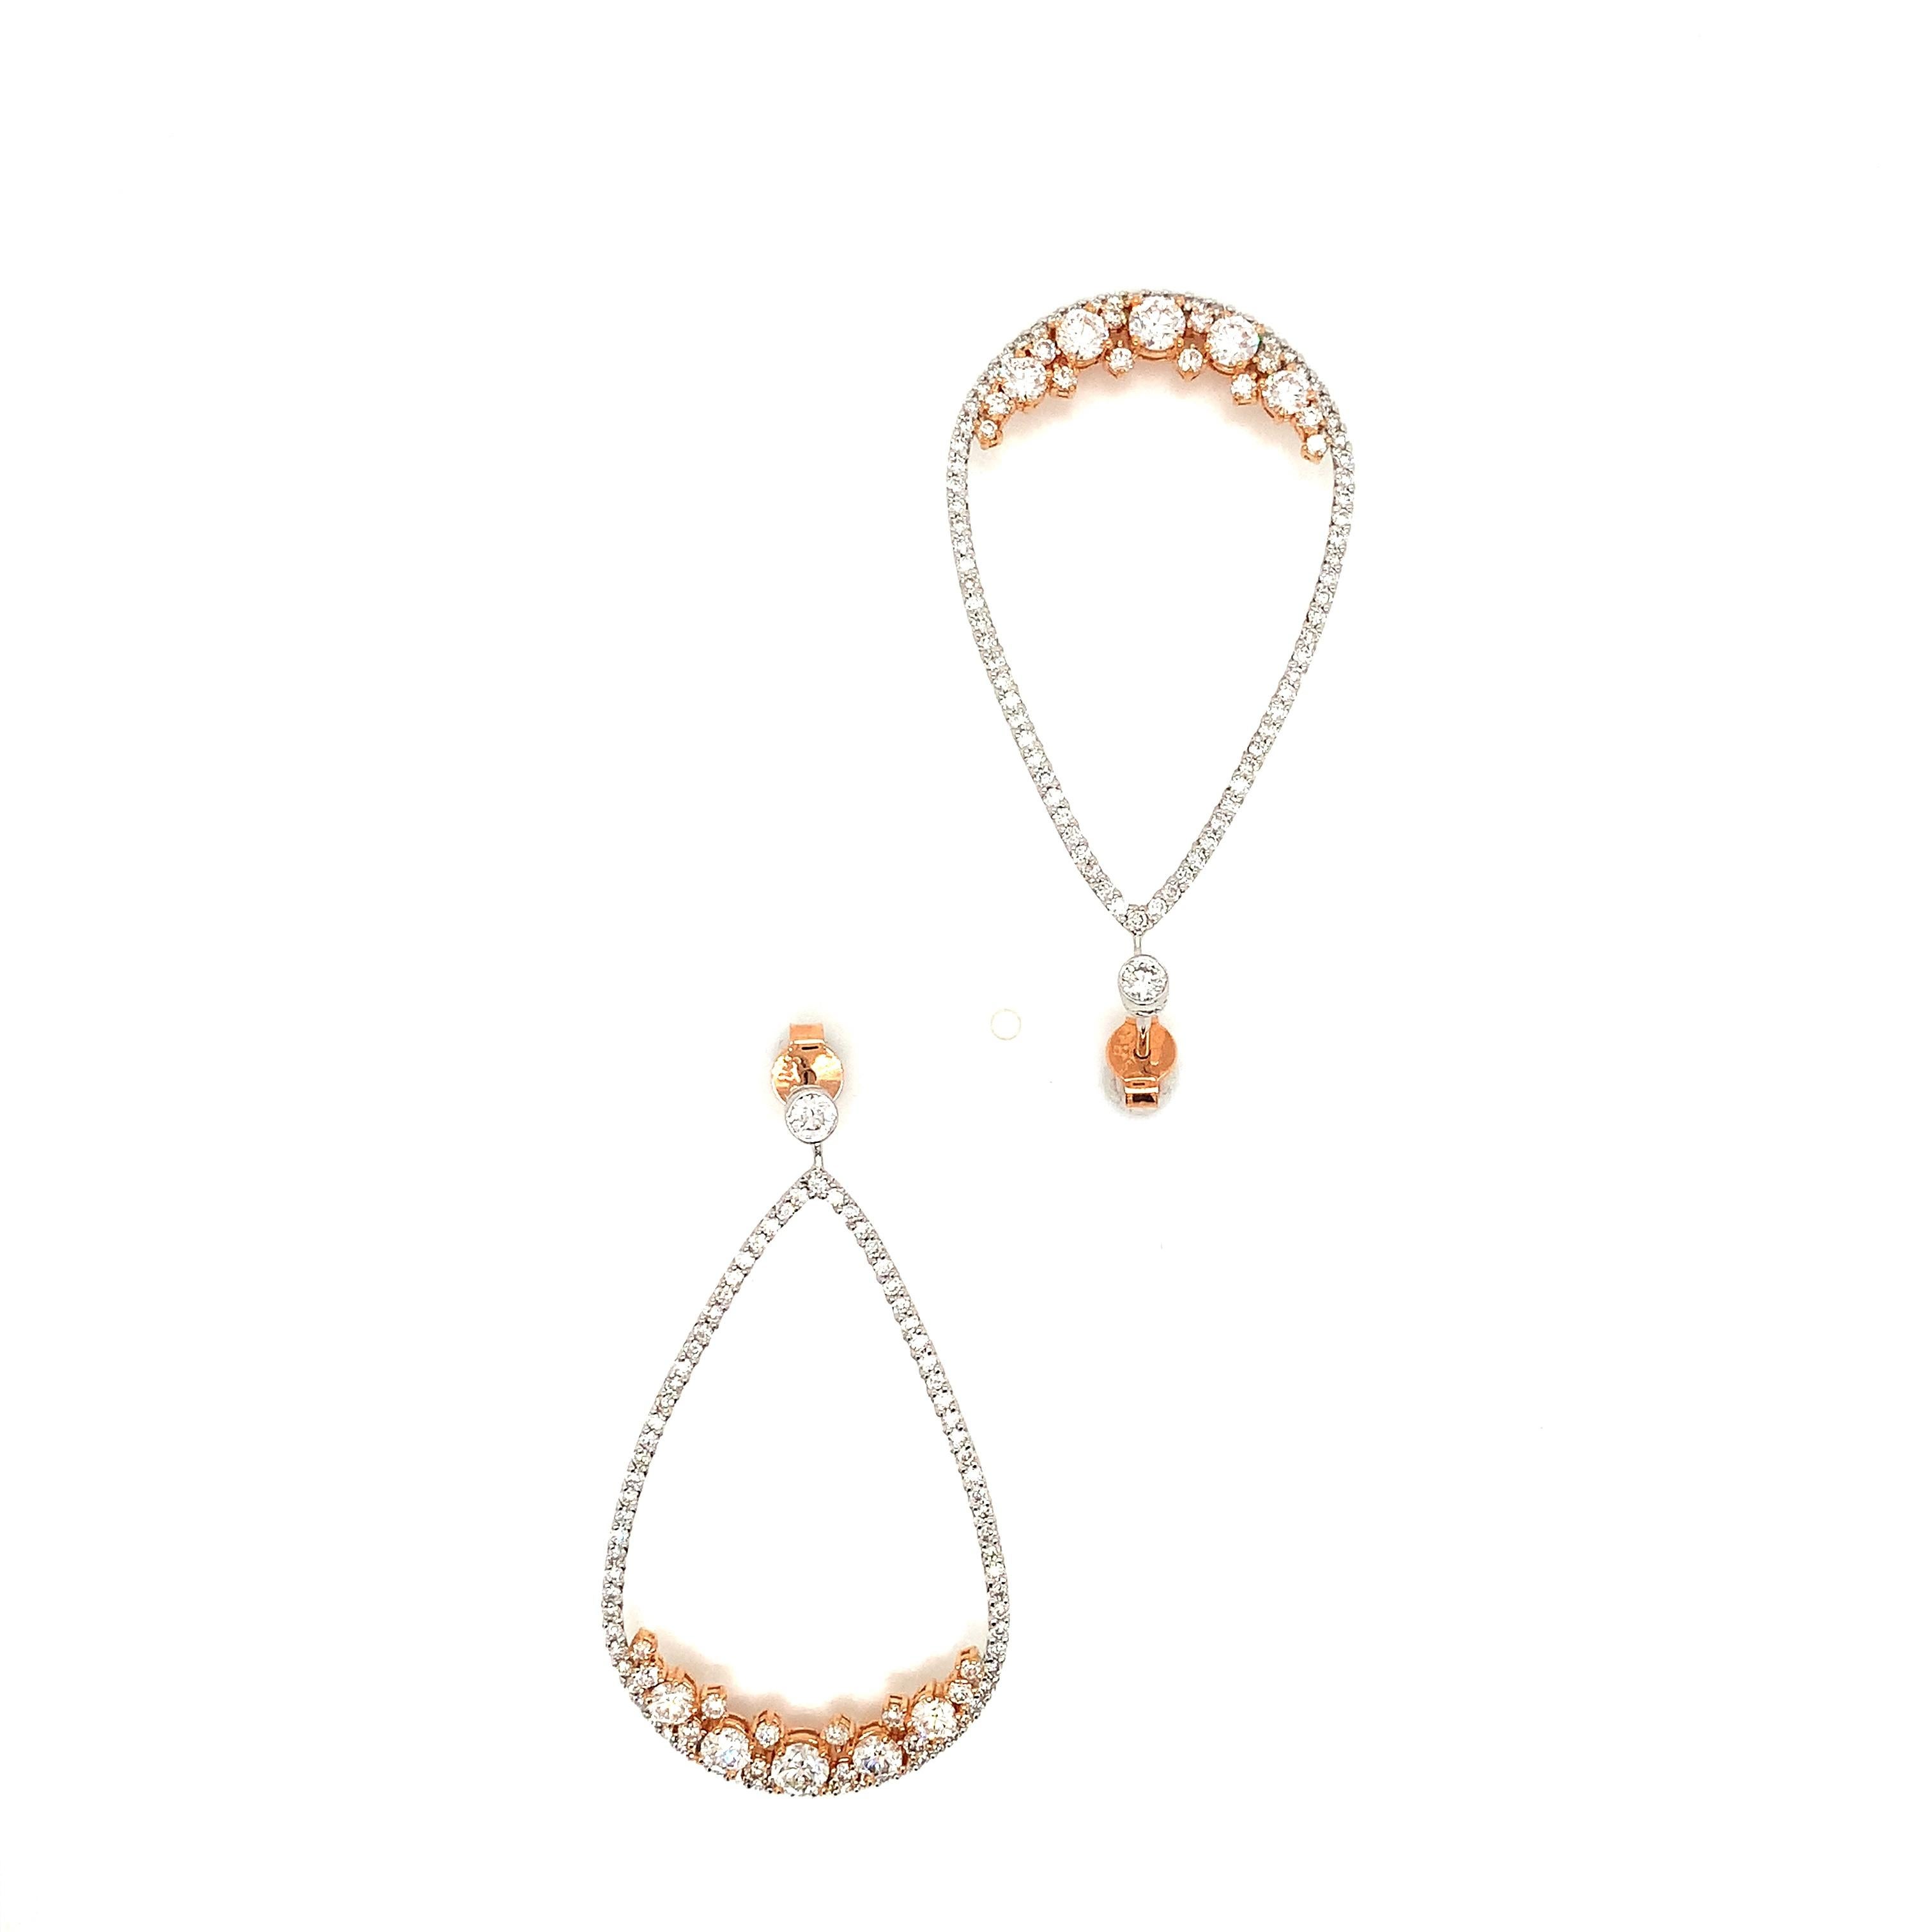 Contemporary OWN Your Story 18K White and Rose Gold Brilliant Diamond Pendulum Drop Earrings For Sale